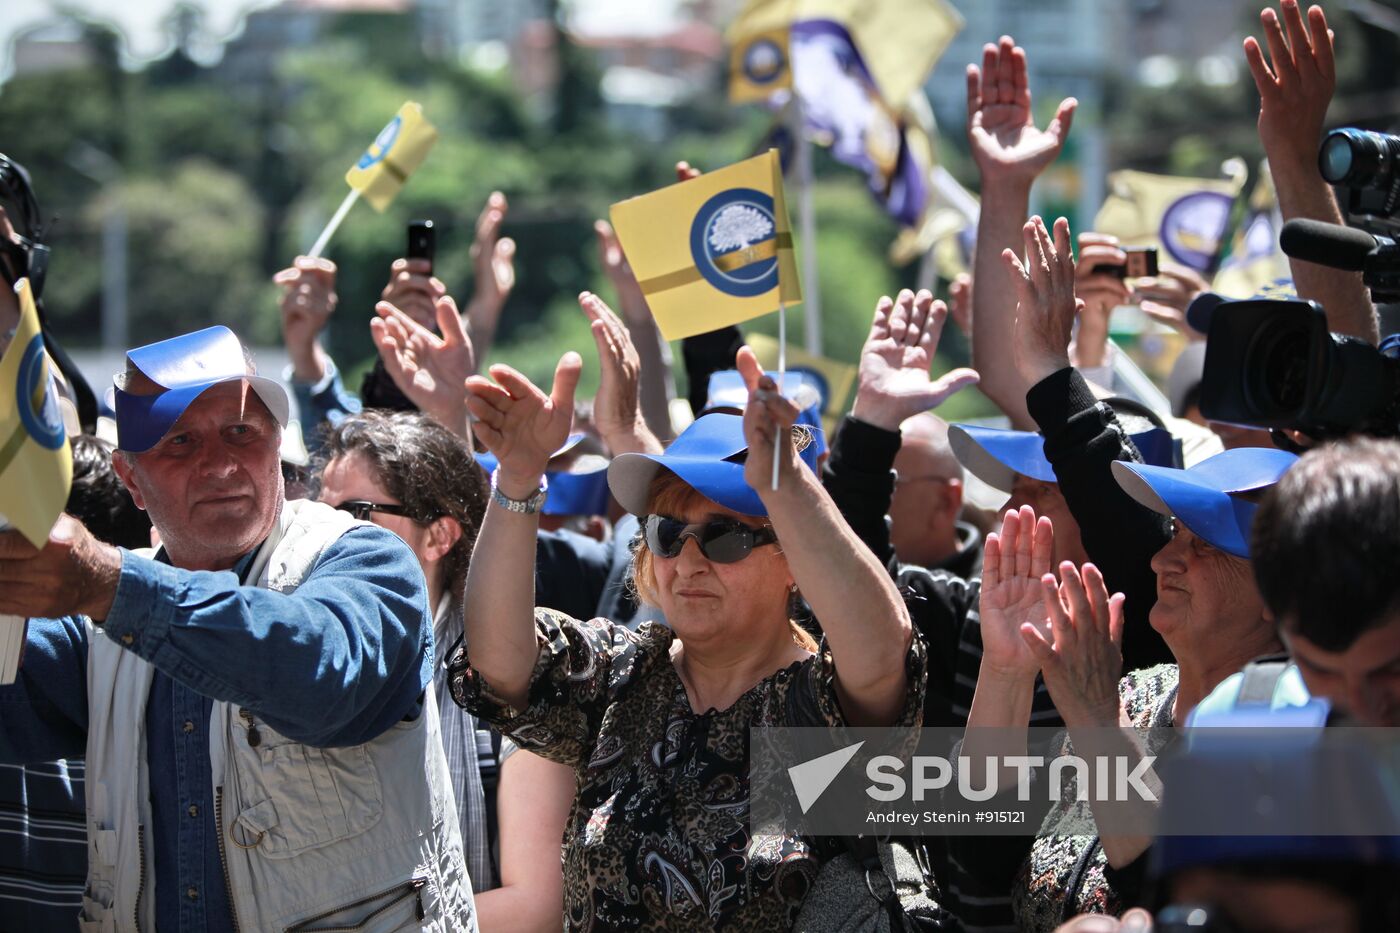 Opposition activists hold rally in Georgia